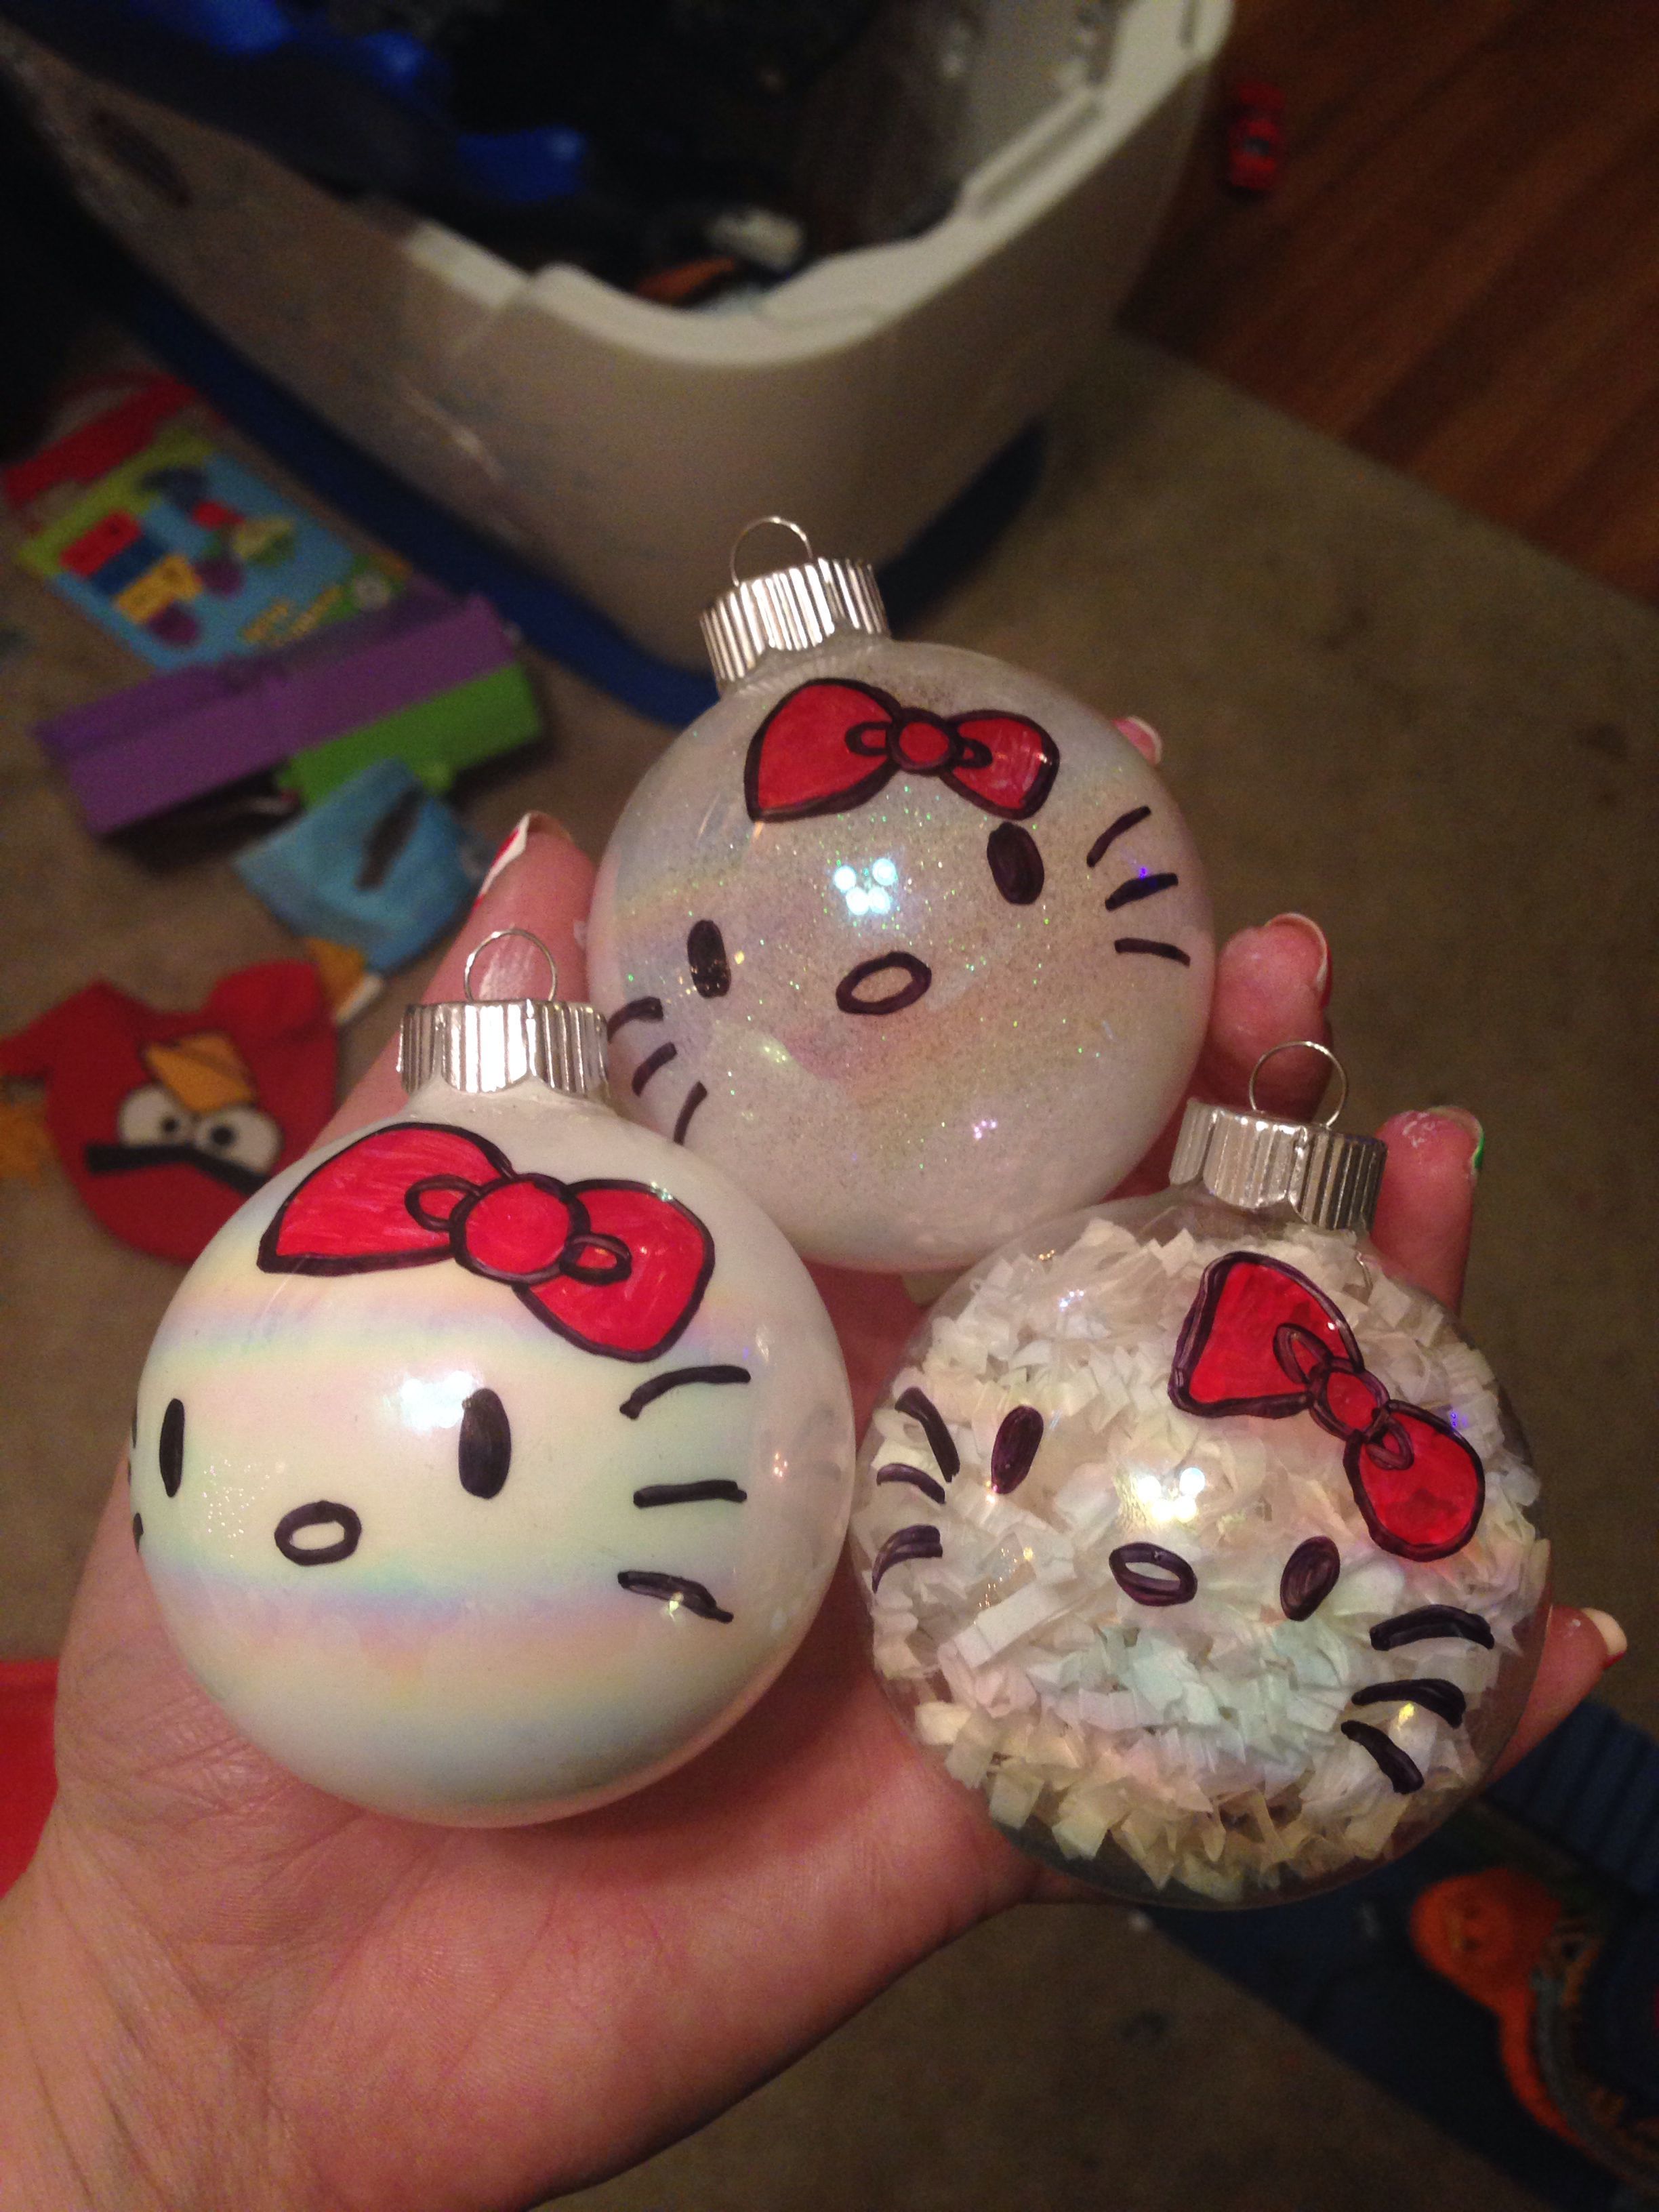 Hello kitty diy ornaments- contact me to order supply kit or completed product! LexiJosh at gmail